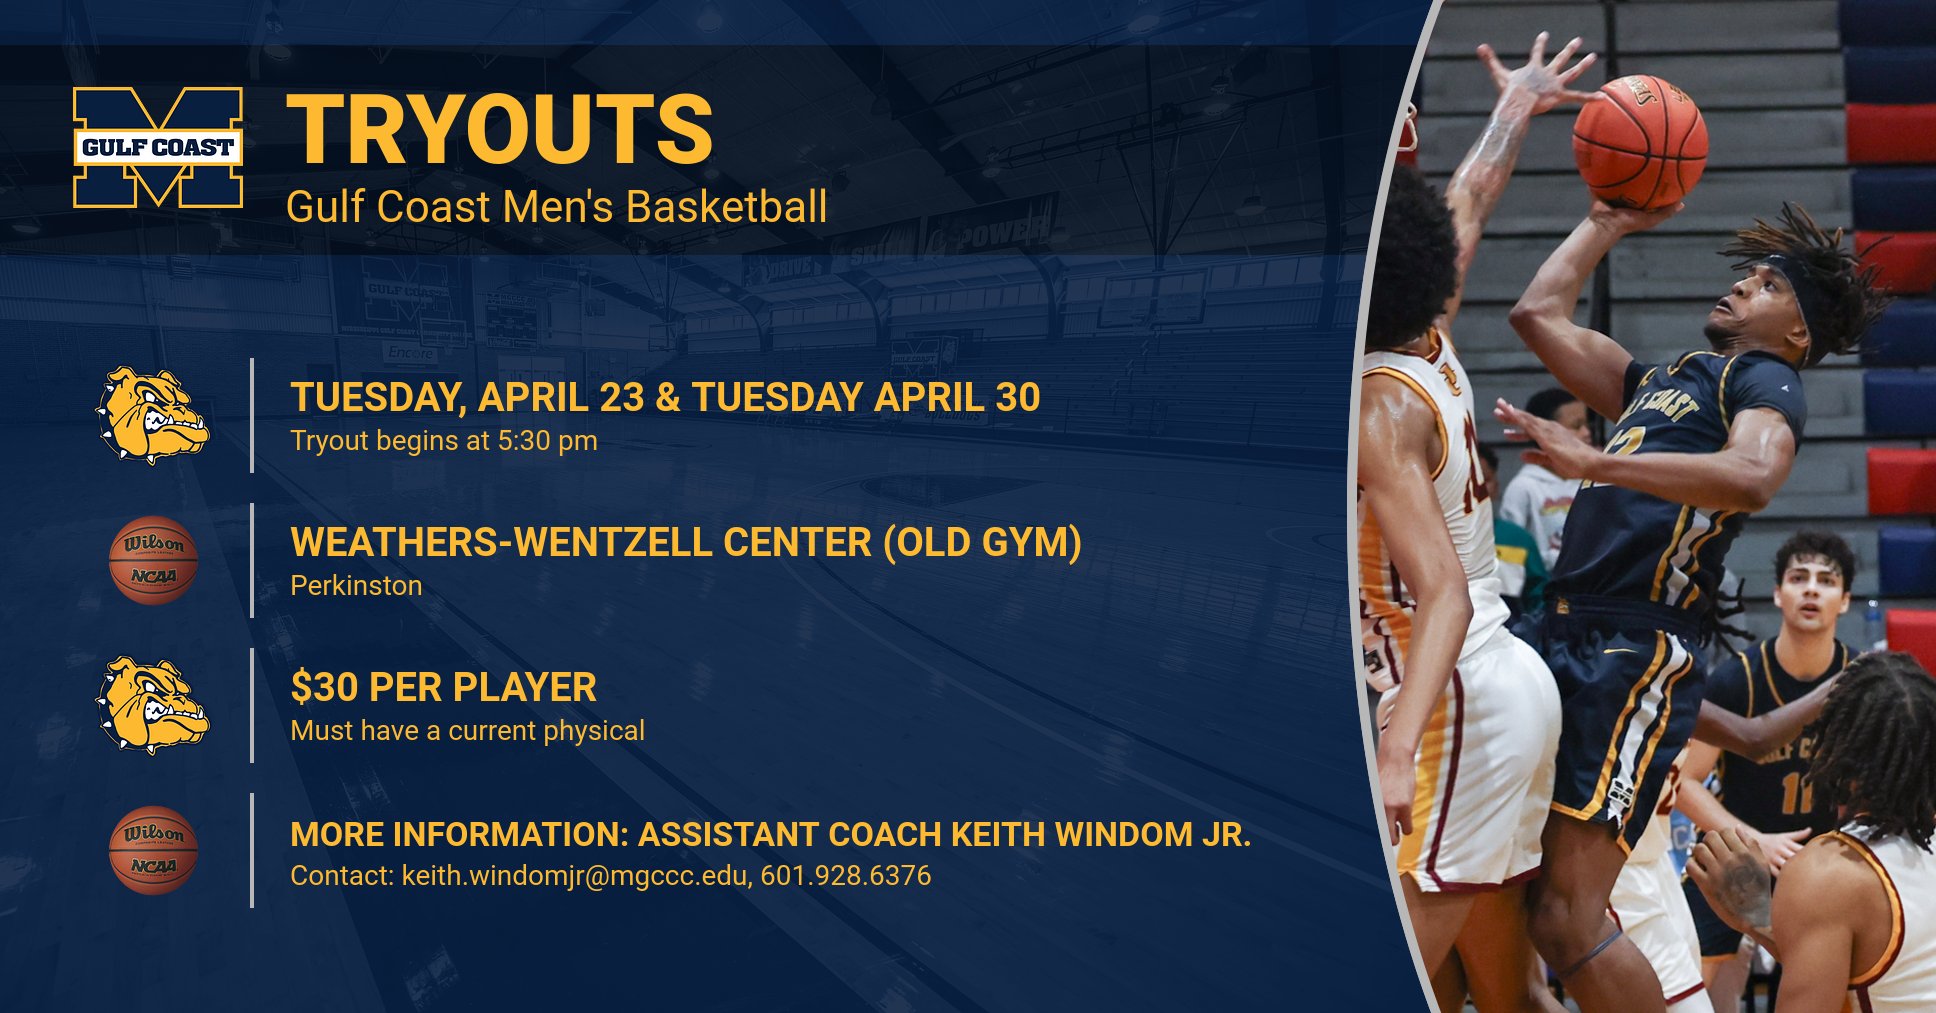 Men’s Basketball to hold tryouts